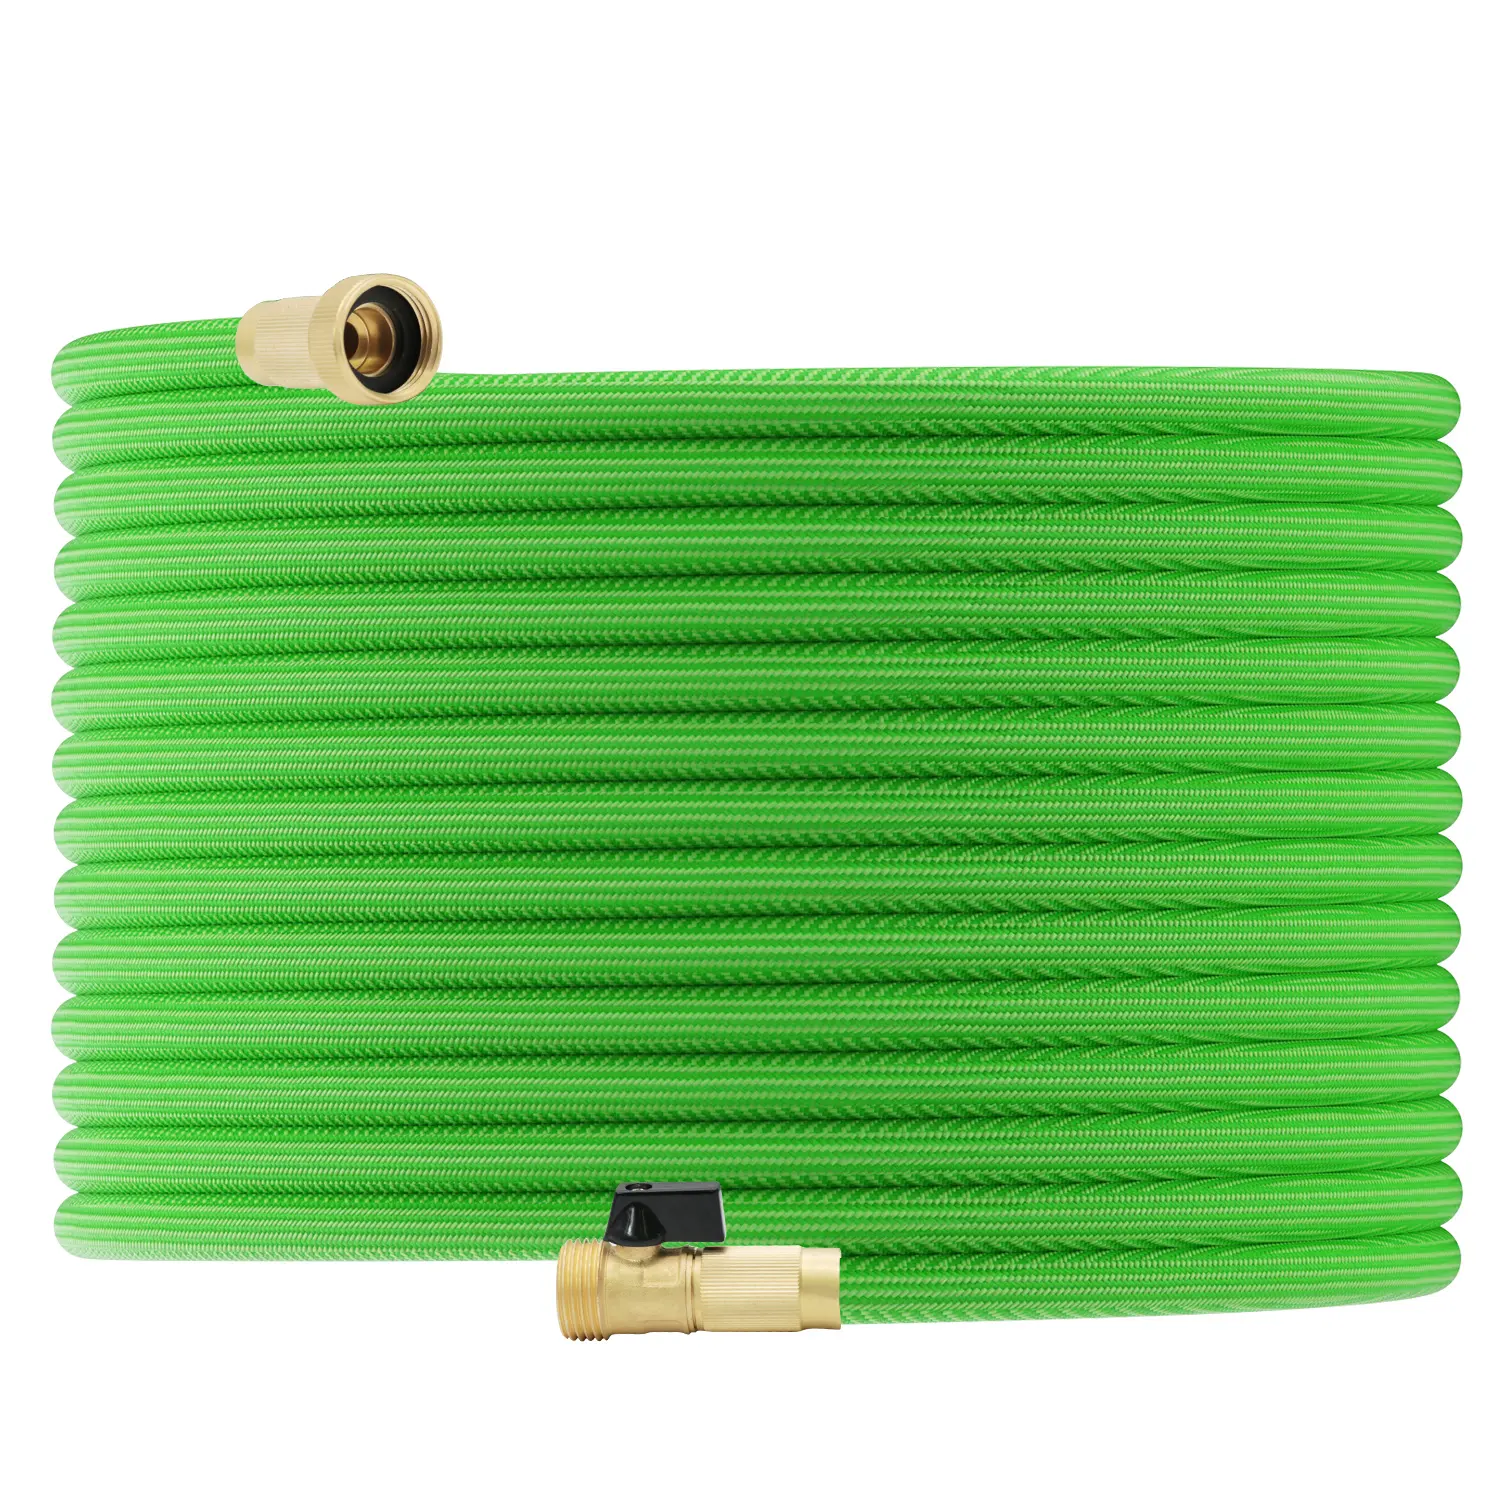 Newest PVC 50FT 100FT Garden Water Hose with 3/4" Solid Brass Connectors